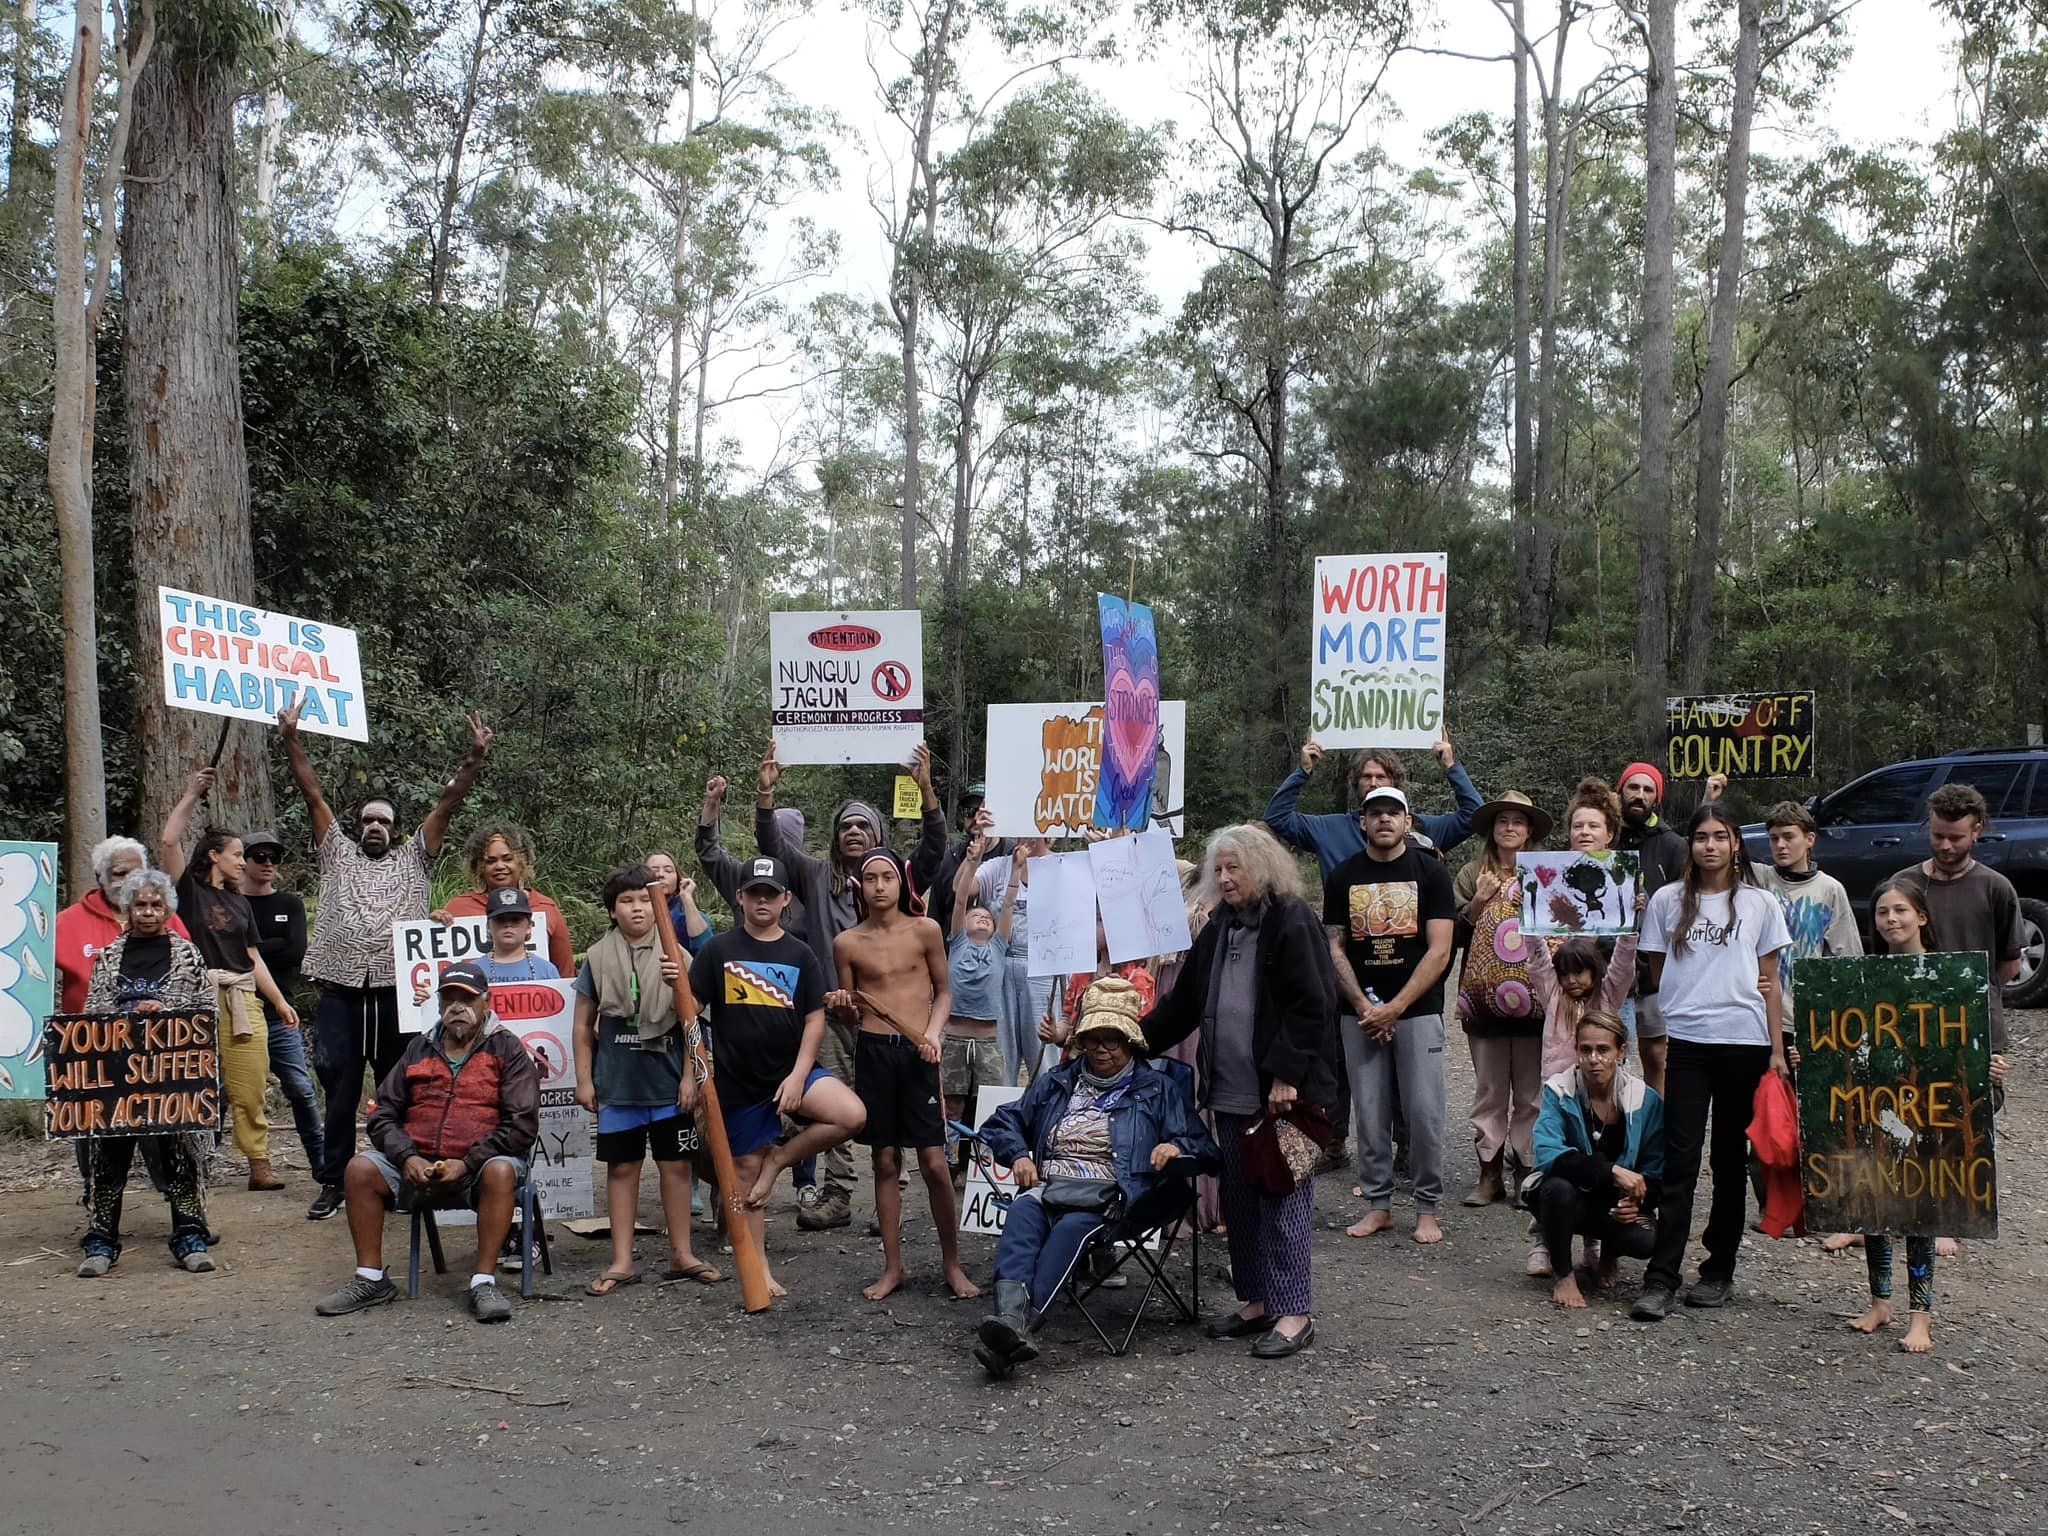 Protesters in a forest, holding up signs.